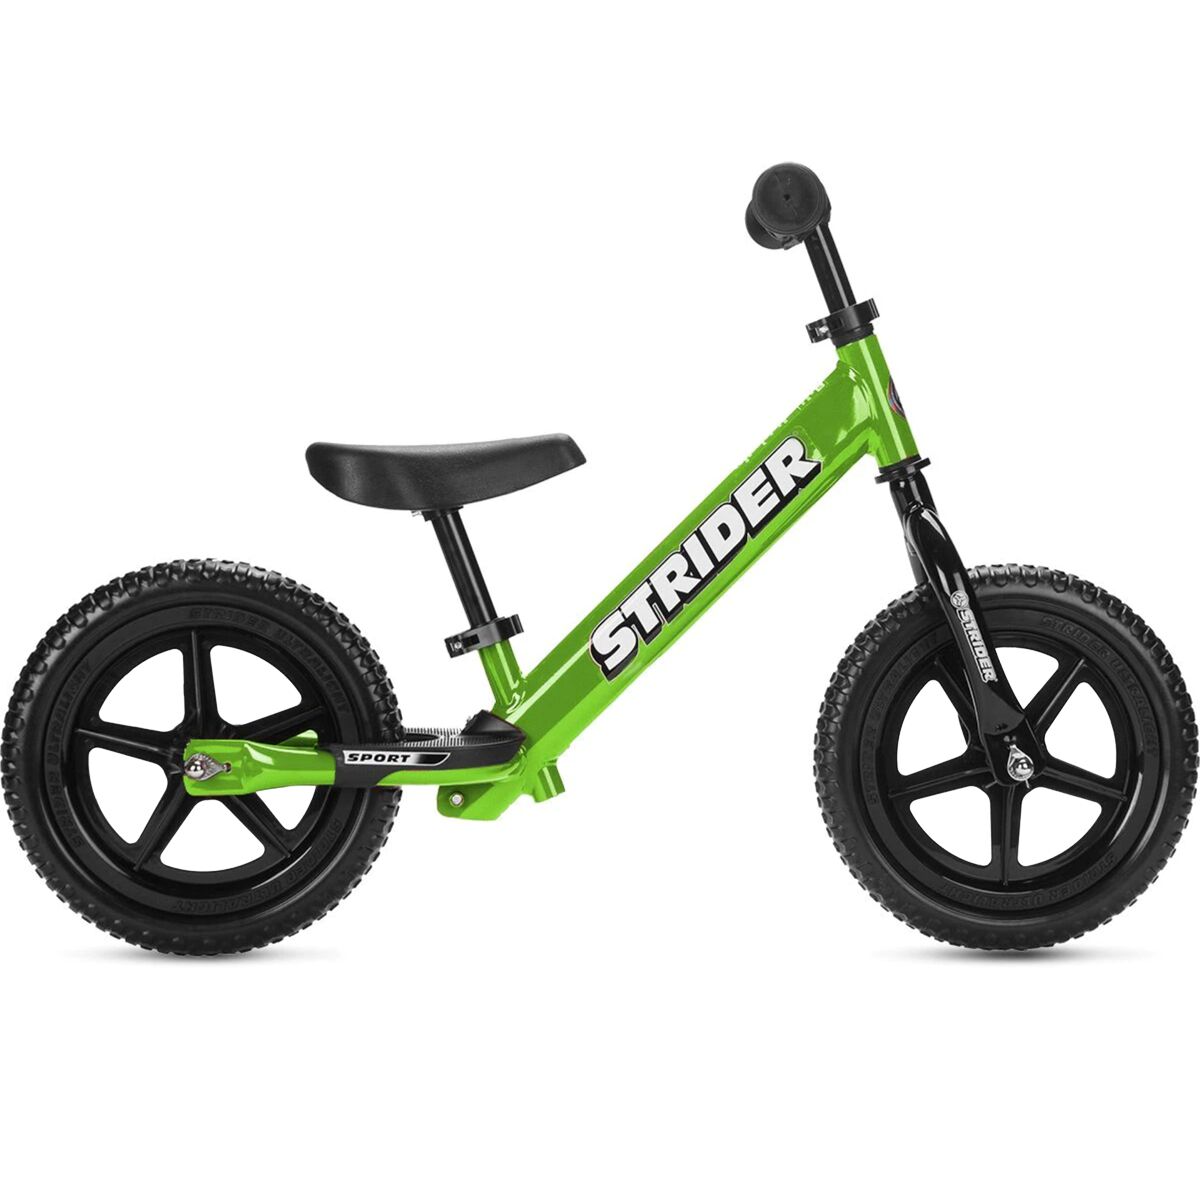 HAPTOO 7 in & 10 in & 12 in Sport Balance Bike Ages 10 Months to 5 Years 